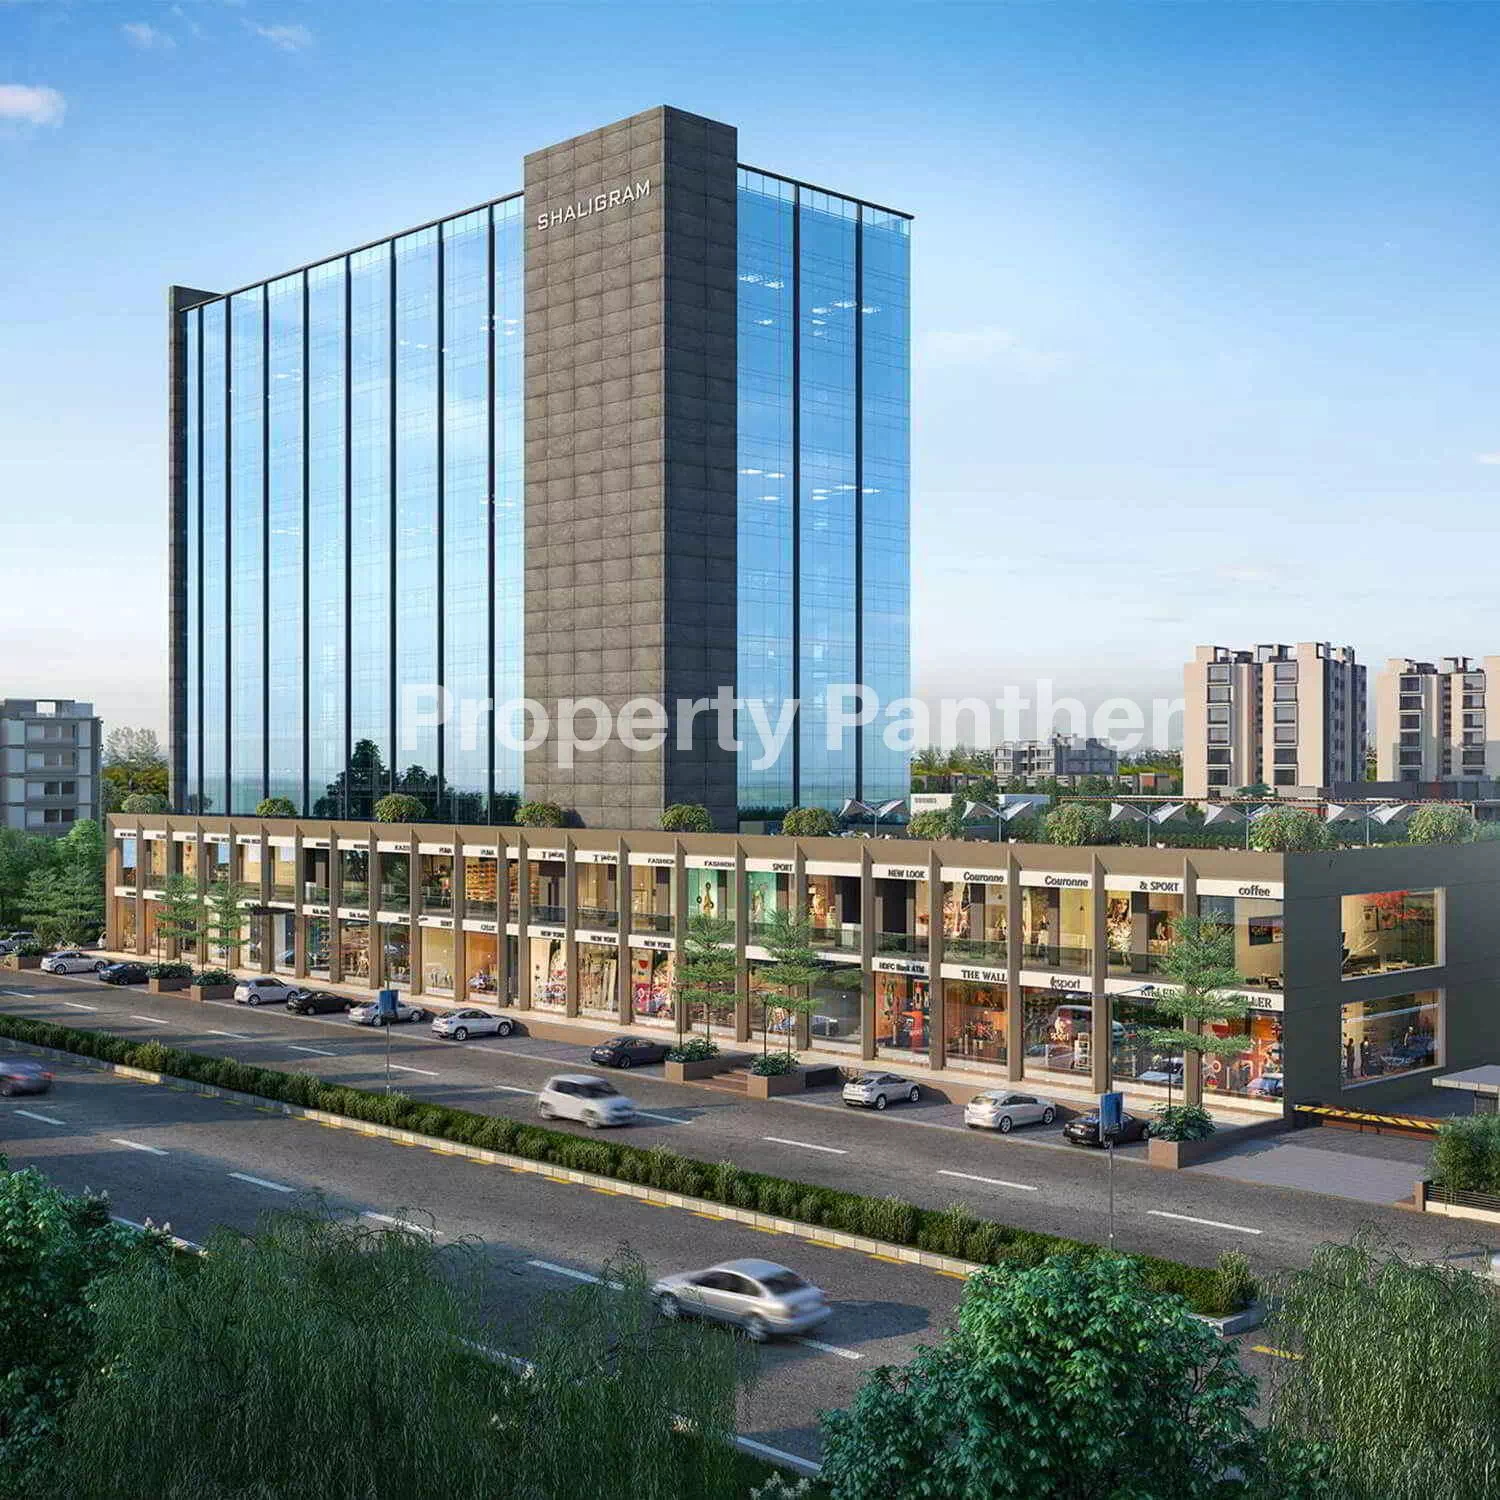 Offices/Showrooms For Sale In Shaligram Corporate, Ambli, Ahmedabad.